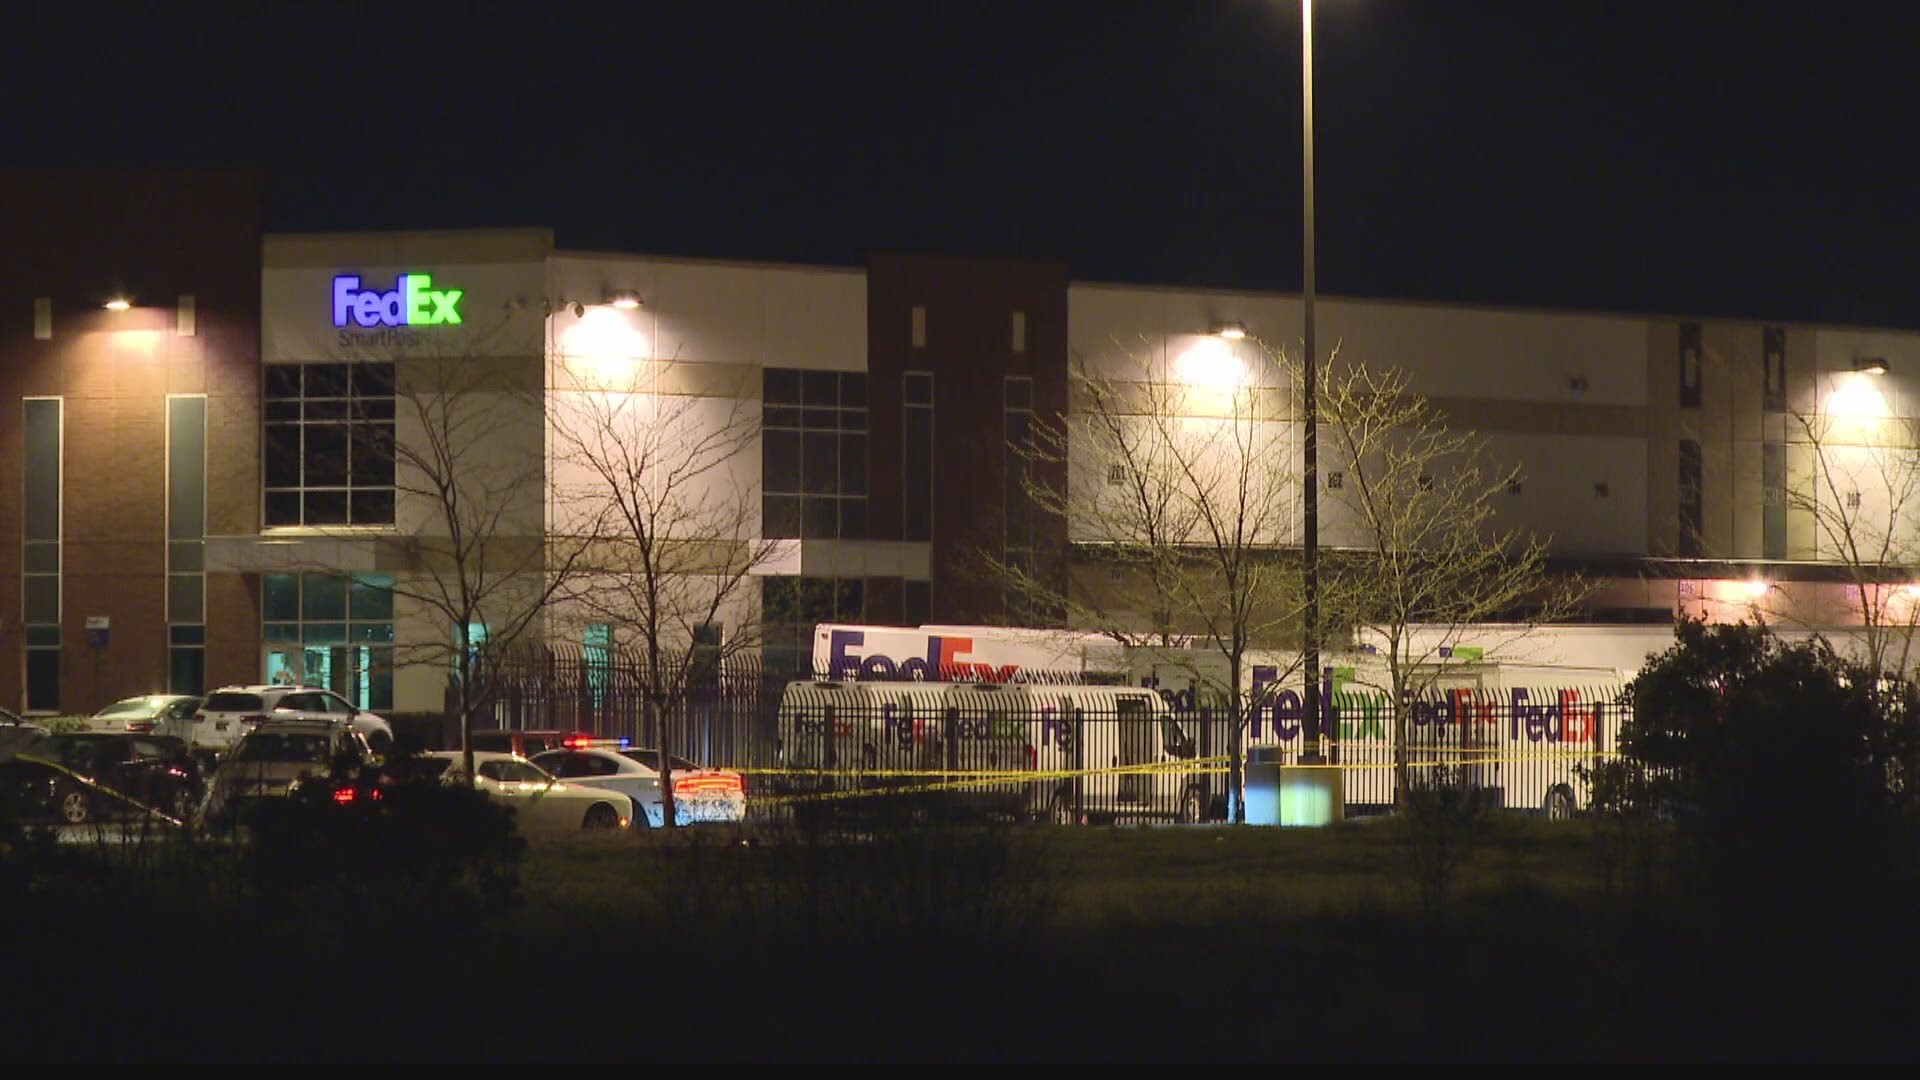 It happened around 11 p.m. Thursday at a facility near Indianapolis International Airport.